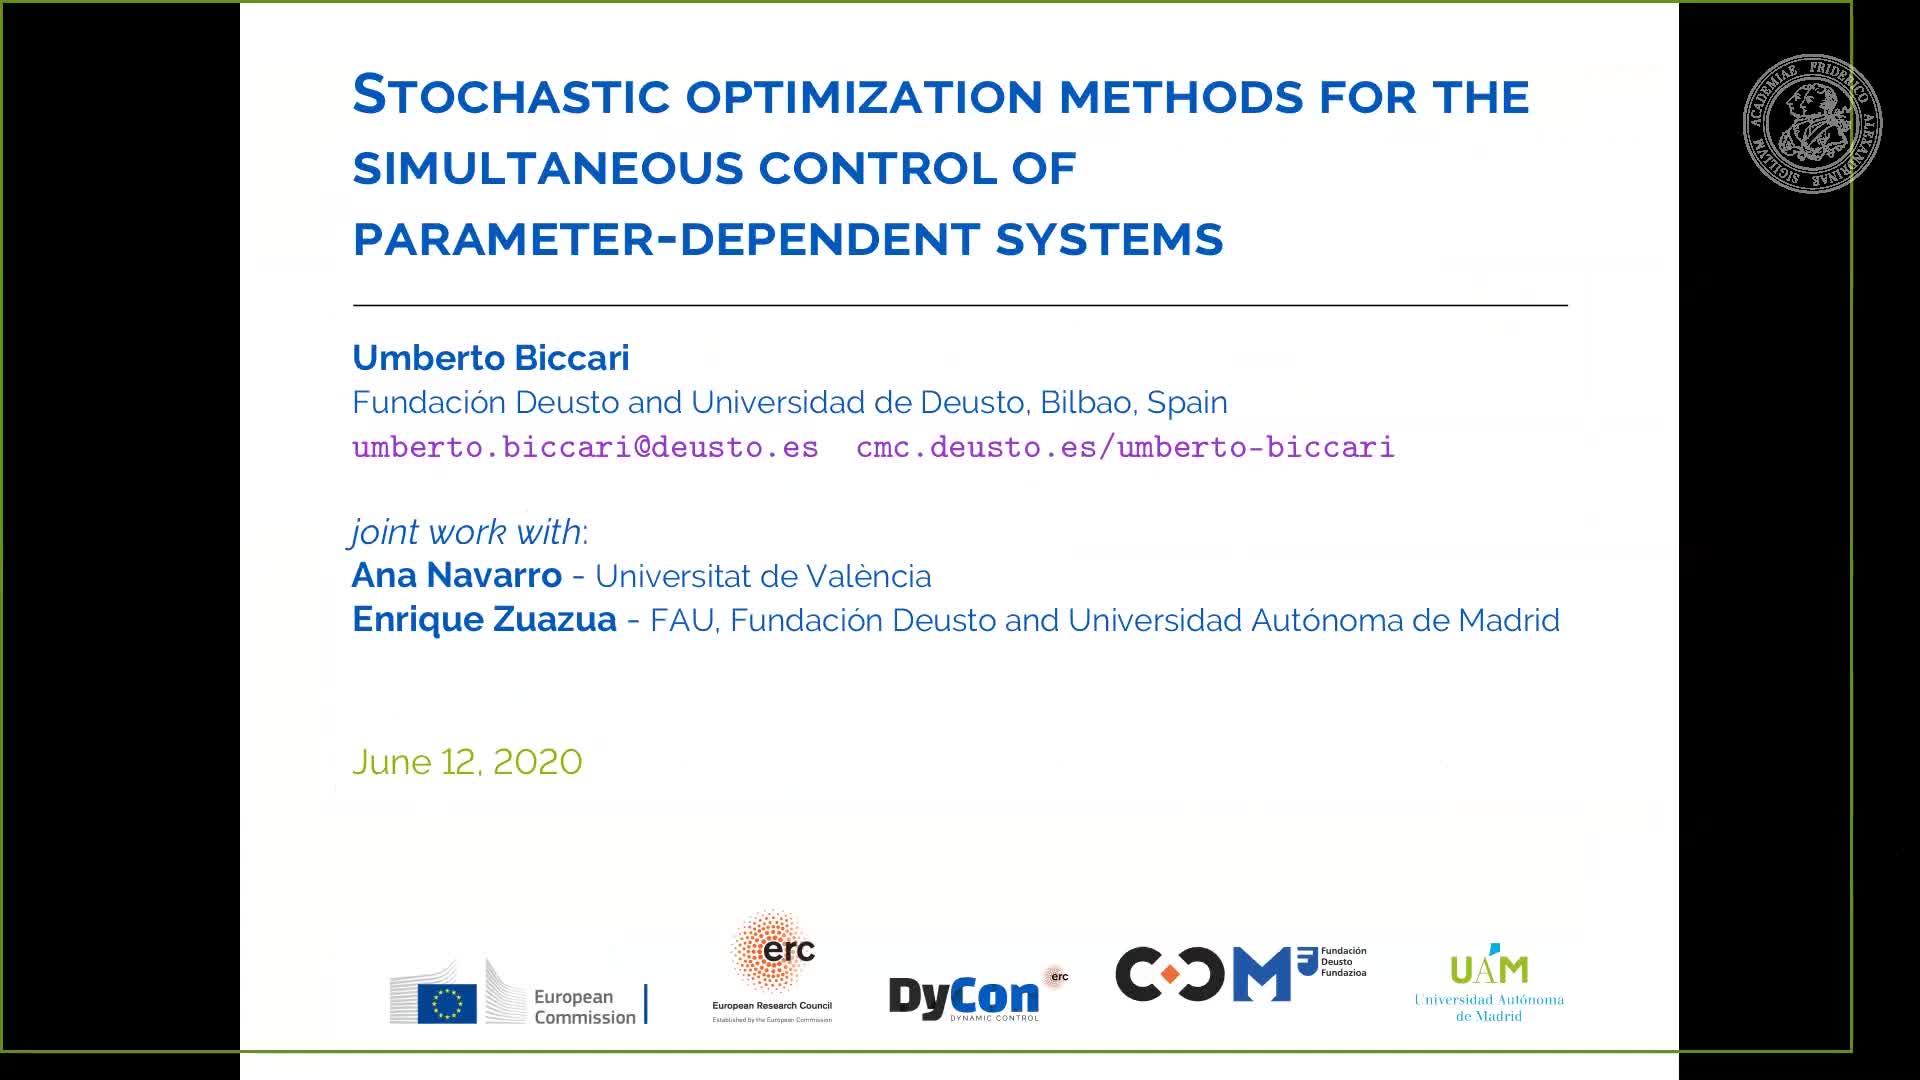 Stochastic optimization methods for the simultaneous control of parameter-dependent systems (Umberto Biccari, Fundación Deusto and Universidad de Deusto) preview image